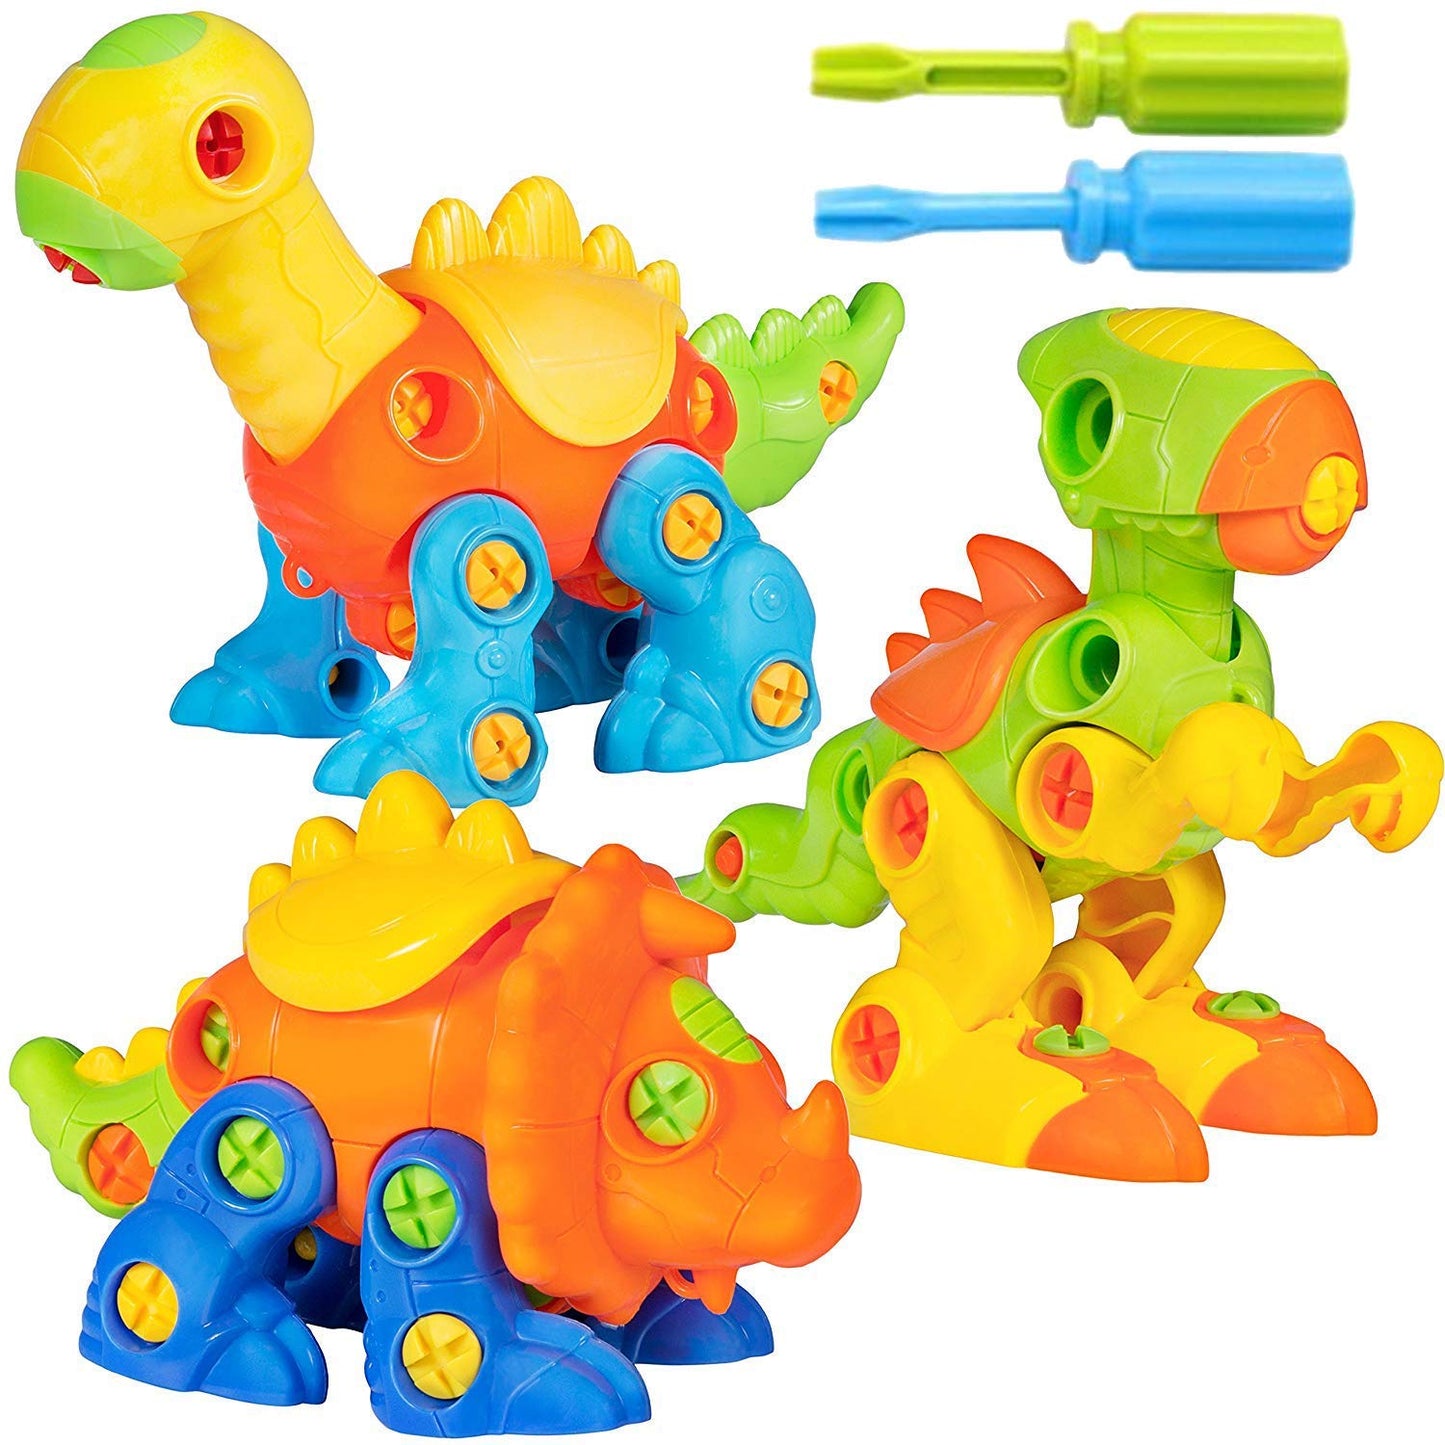 Build-A-Dino Take Apart Dinosaur Toys | 106-Piece Set of 3 Construction Engineering Building STEM Learning Kids Puzzle Playset with Tools and Screws